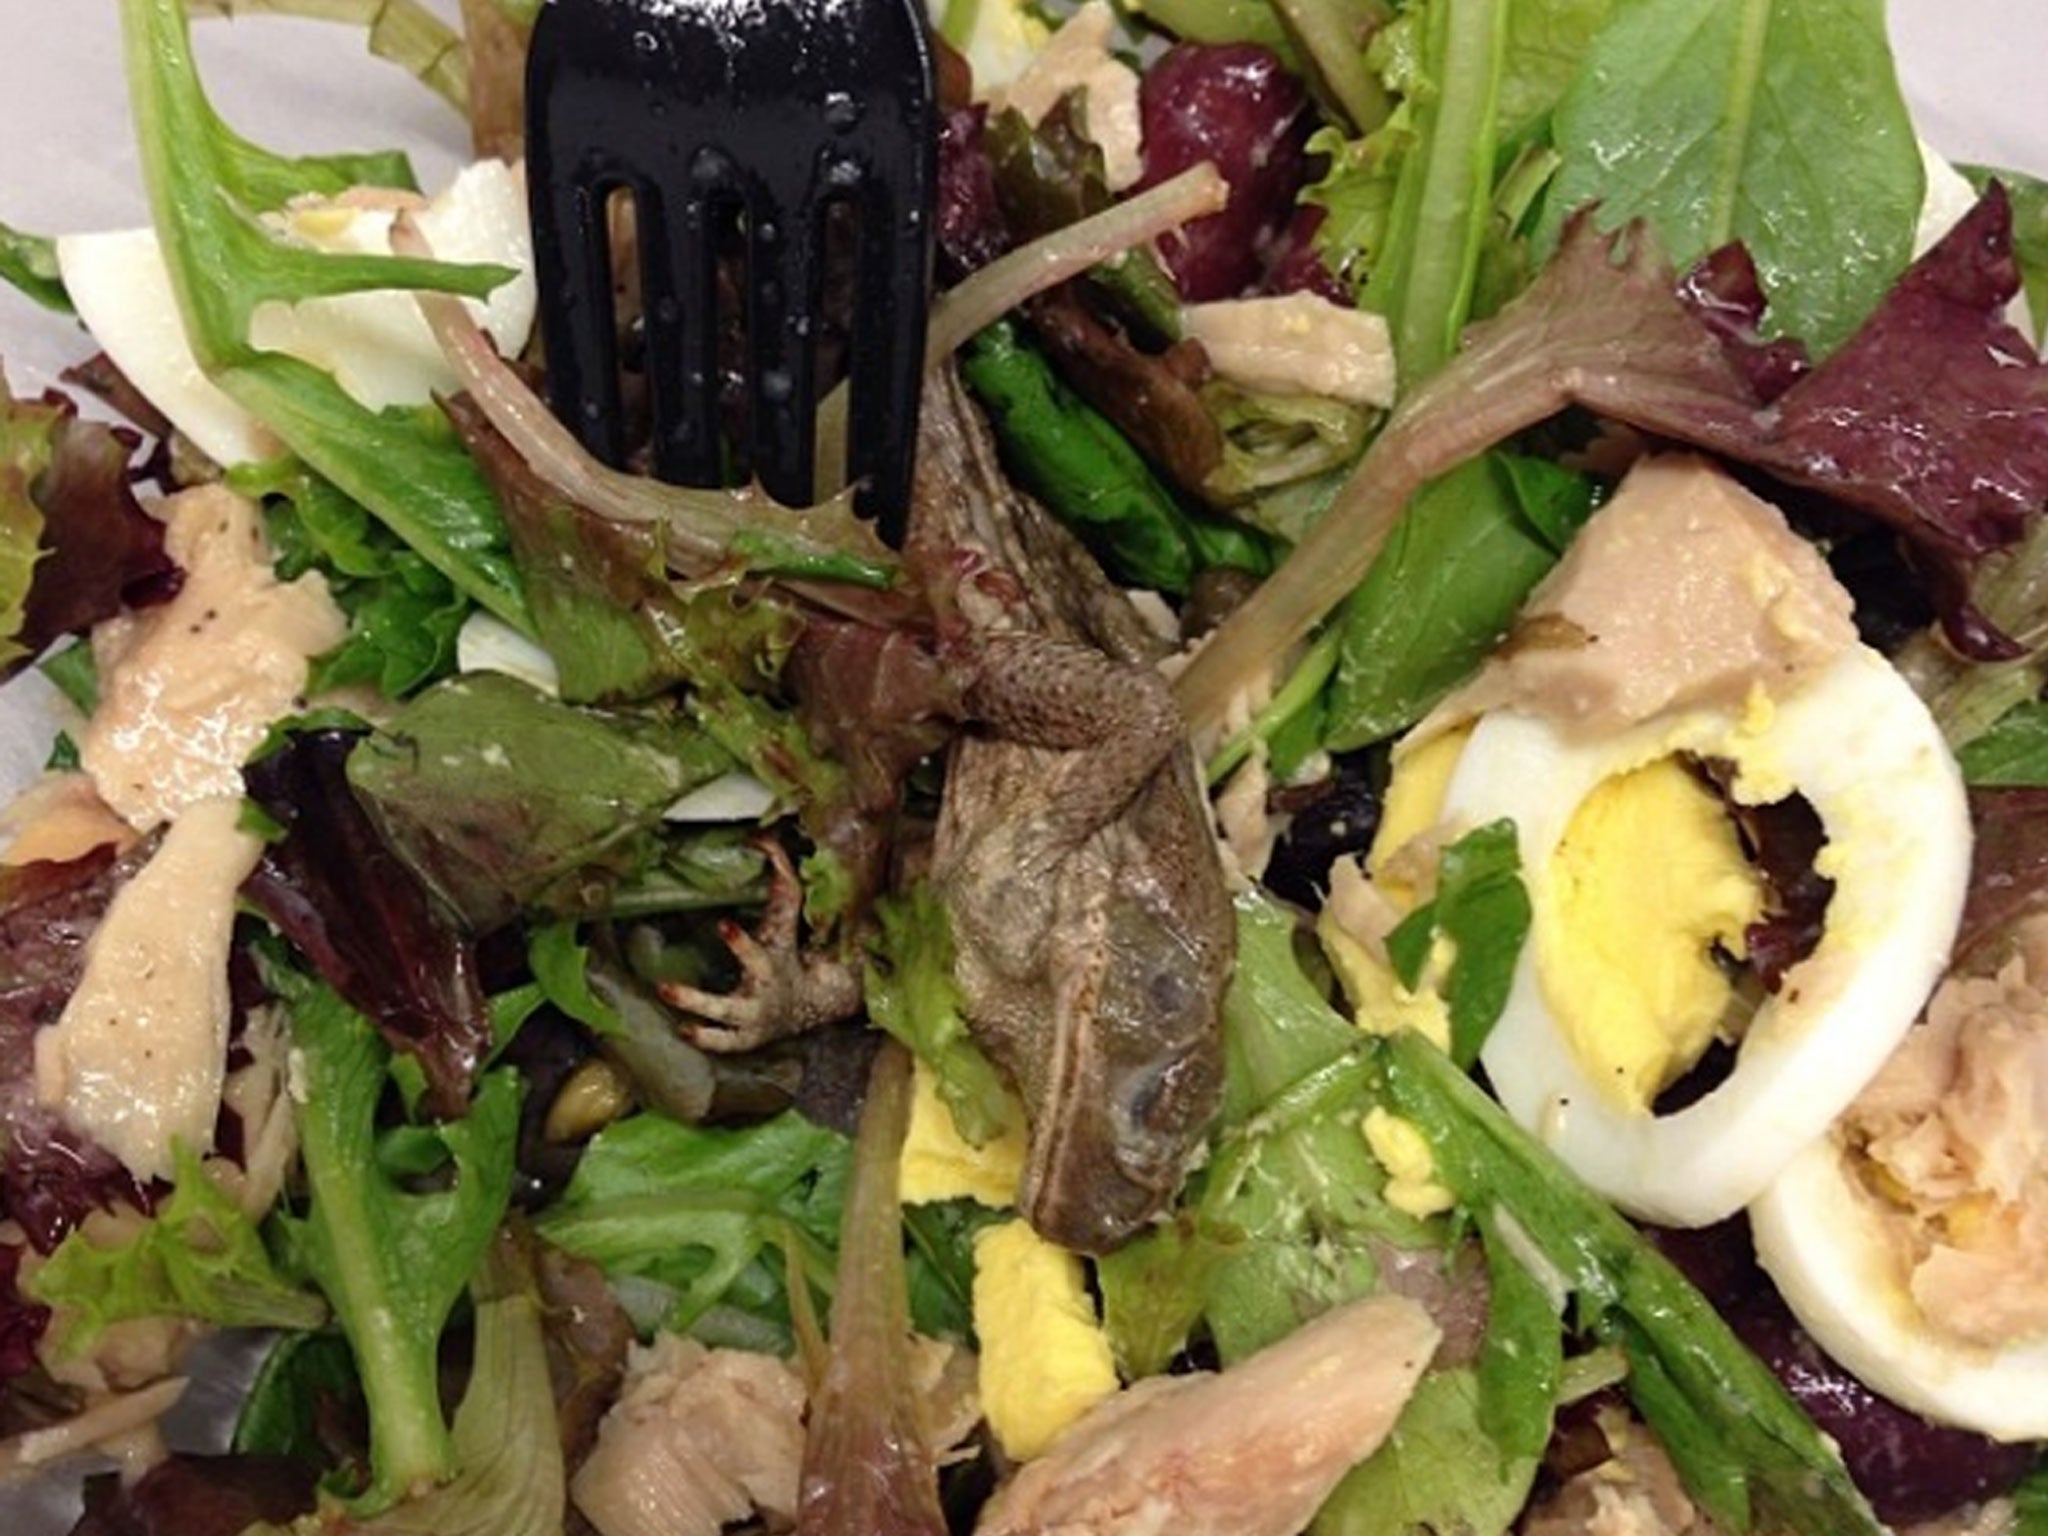 A photo uploaded by Instagram user kathrynlurie showing the frog in the Pret A Manger salad